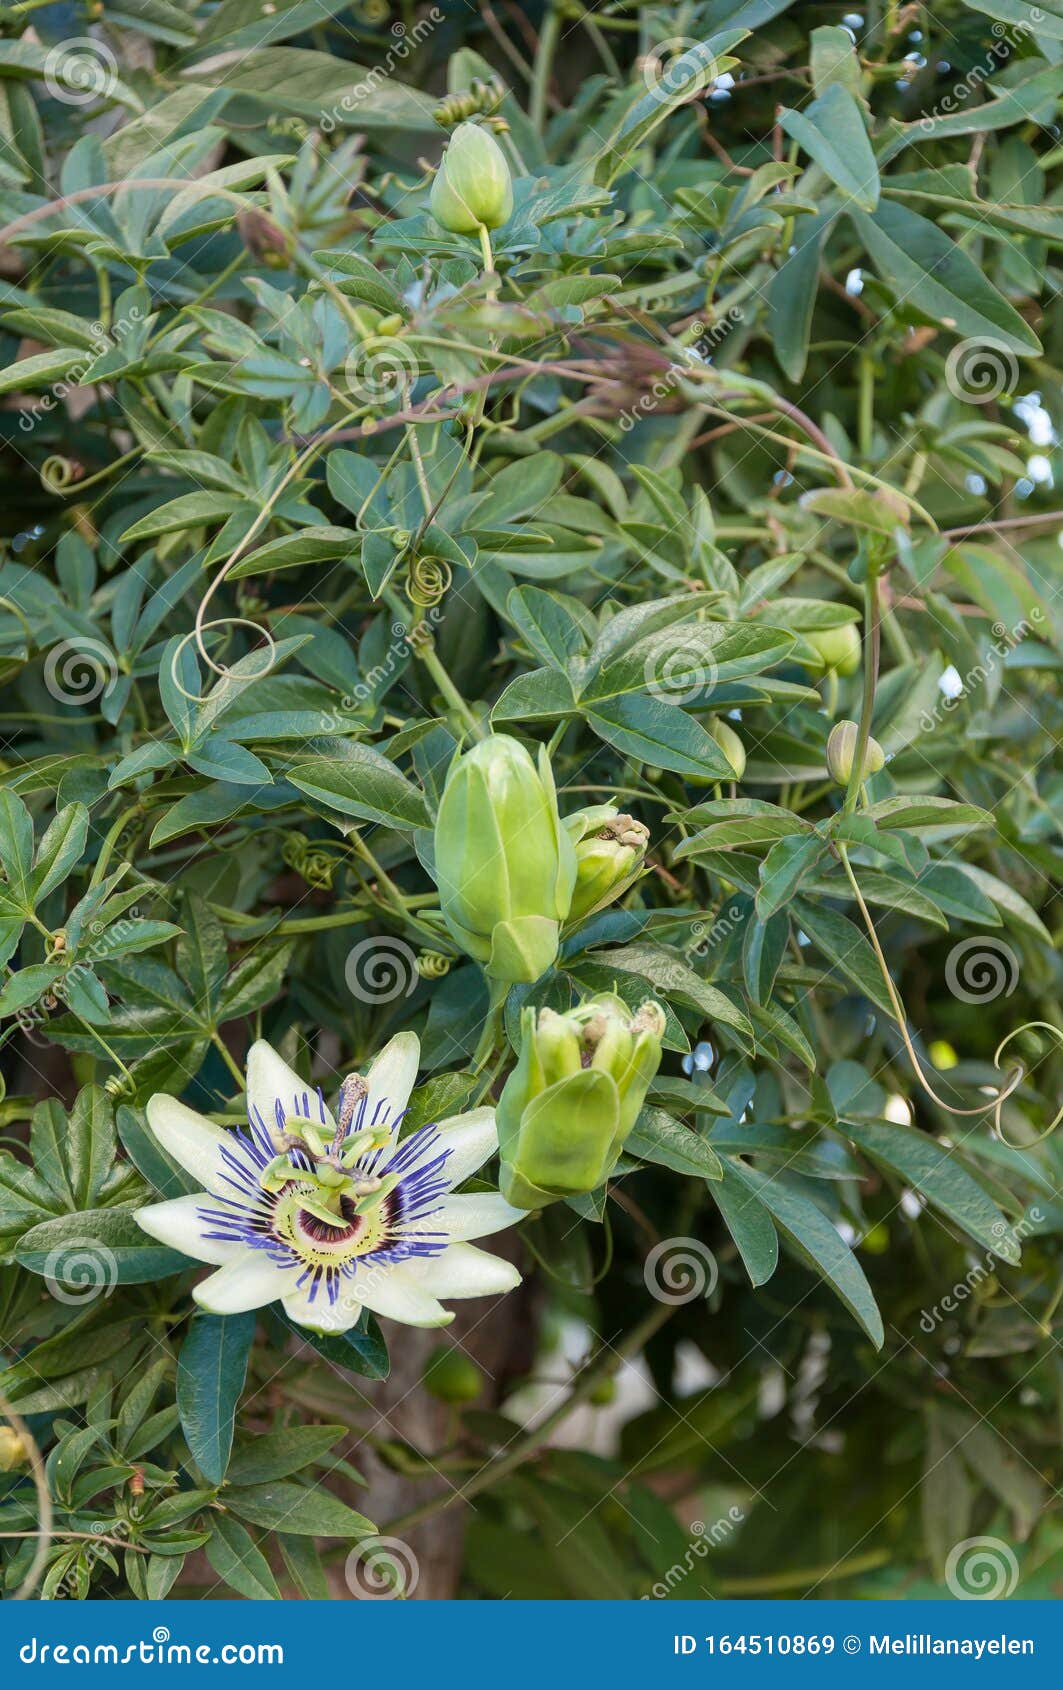 Passion Flower With Buds Stock Image Image Of Blooming 164510869